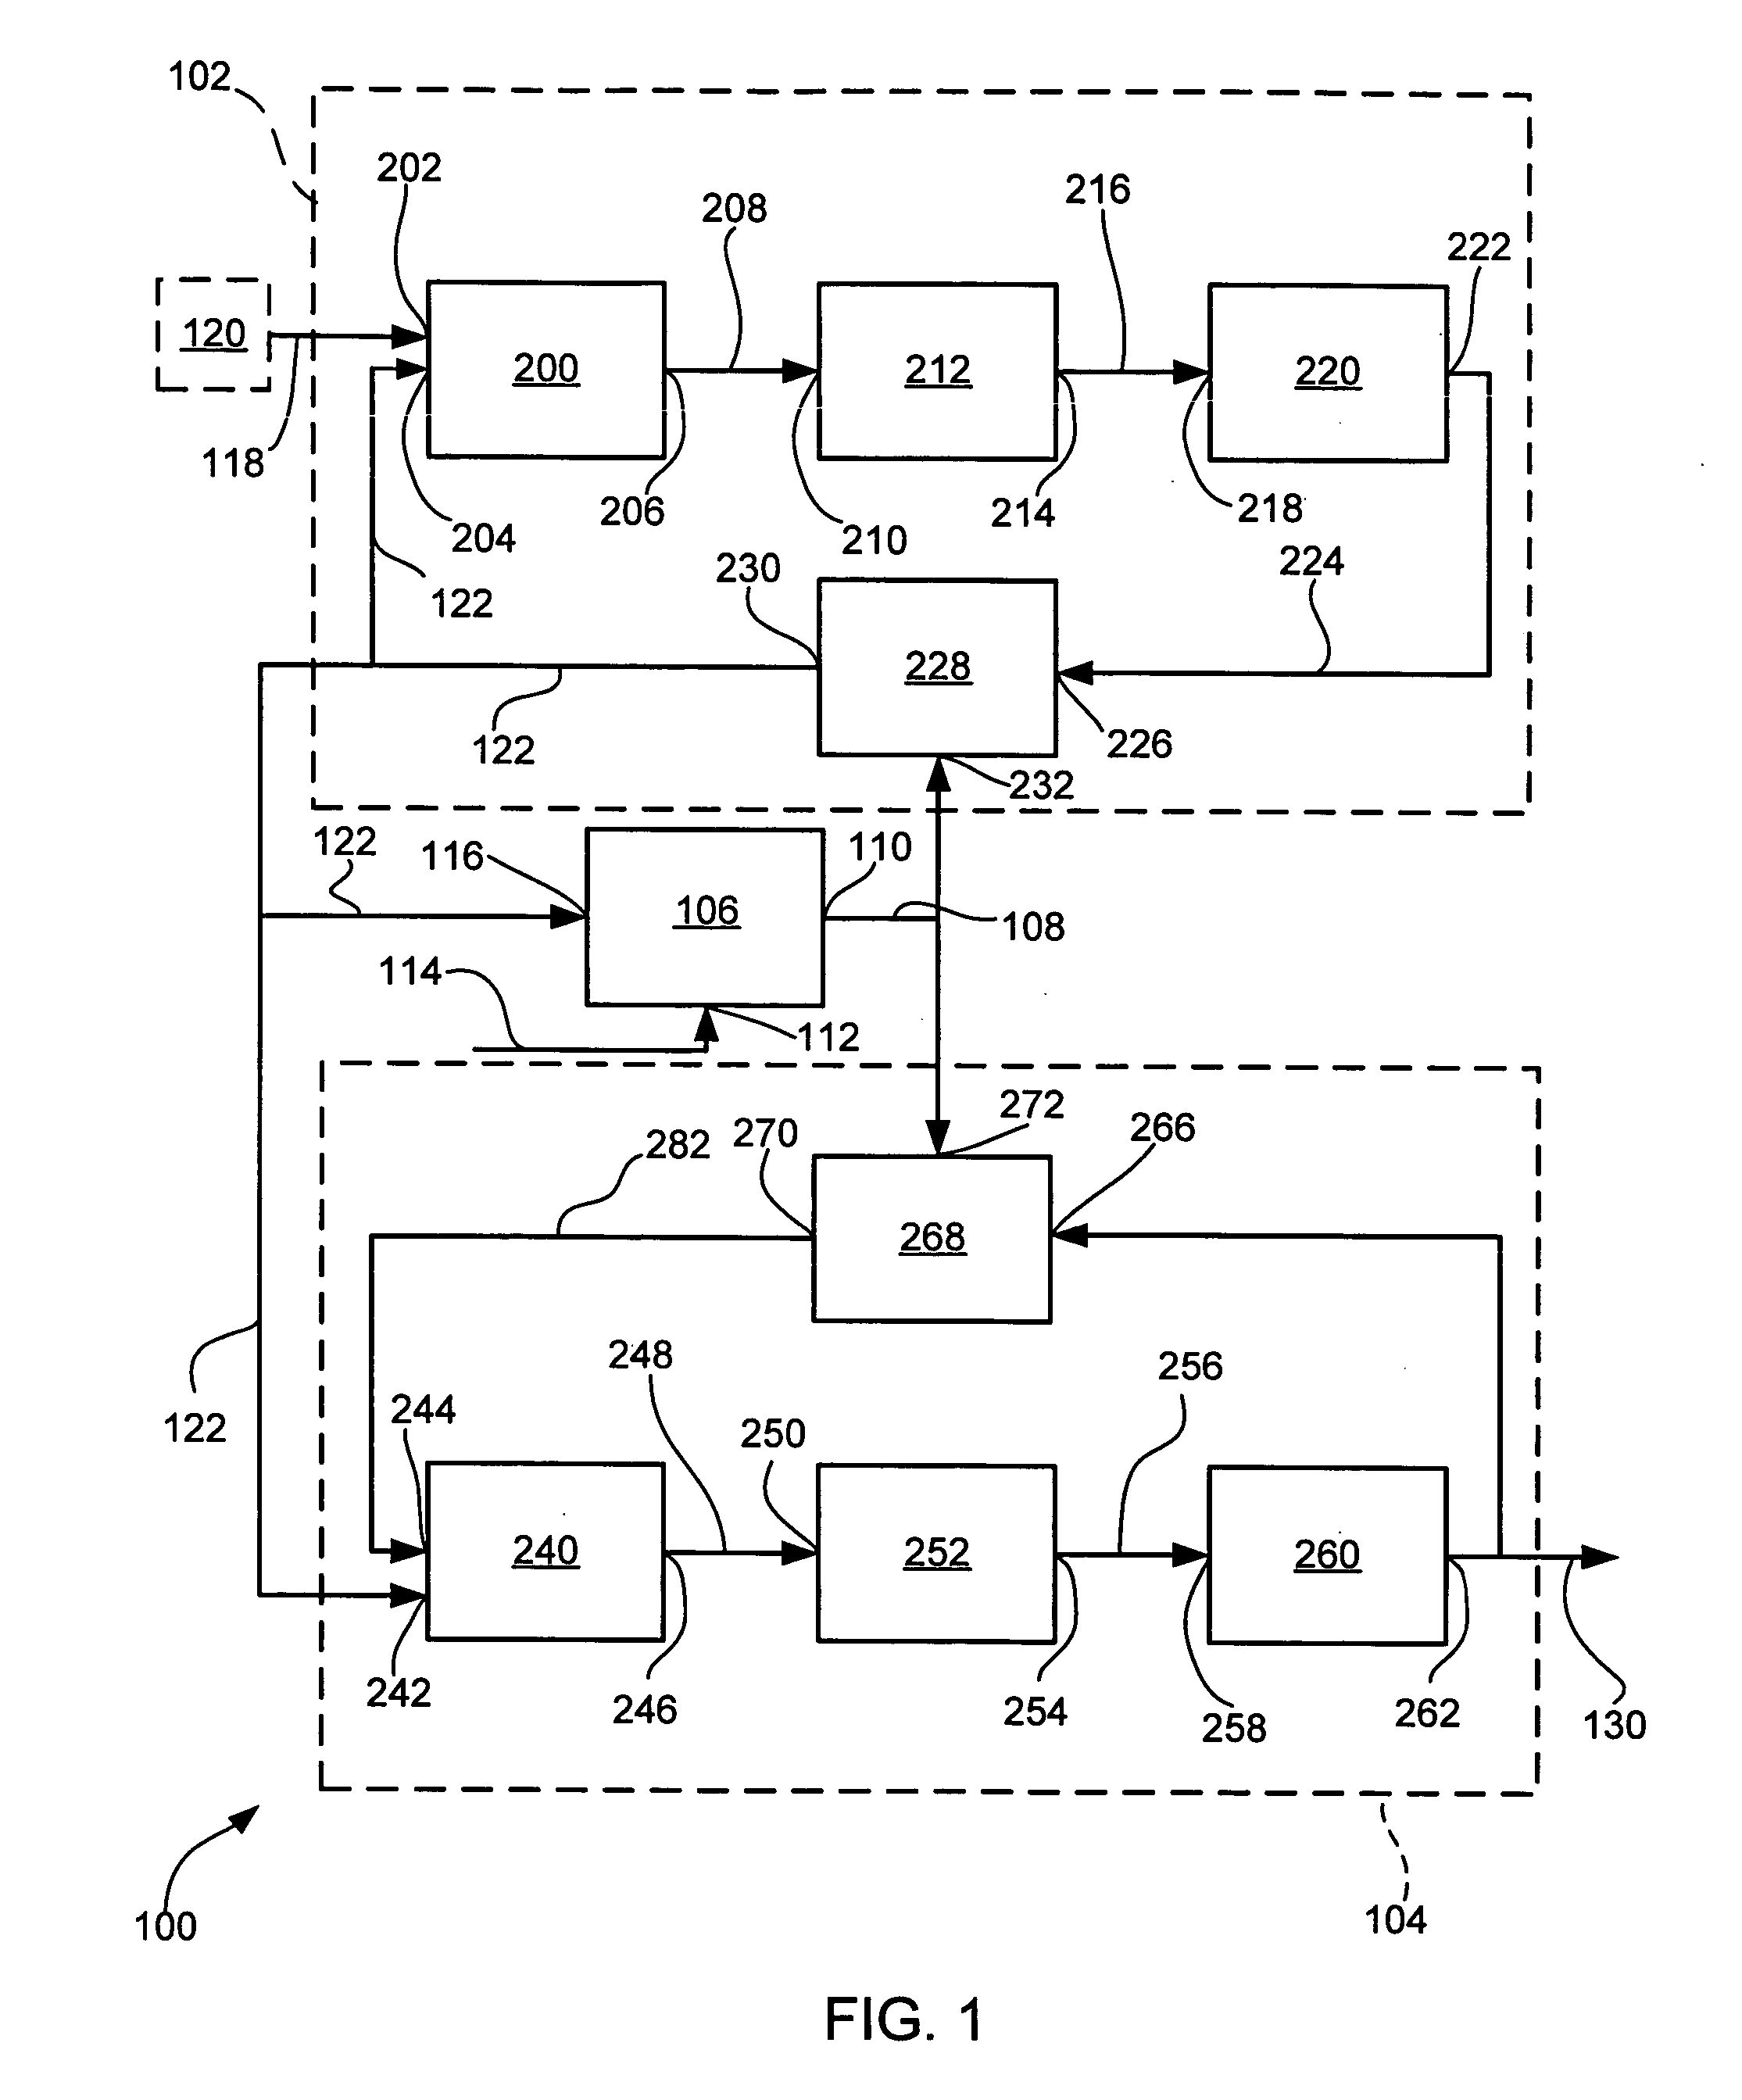 Method and apparatus for generating a phase-locked output signal